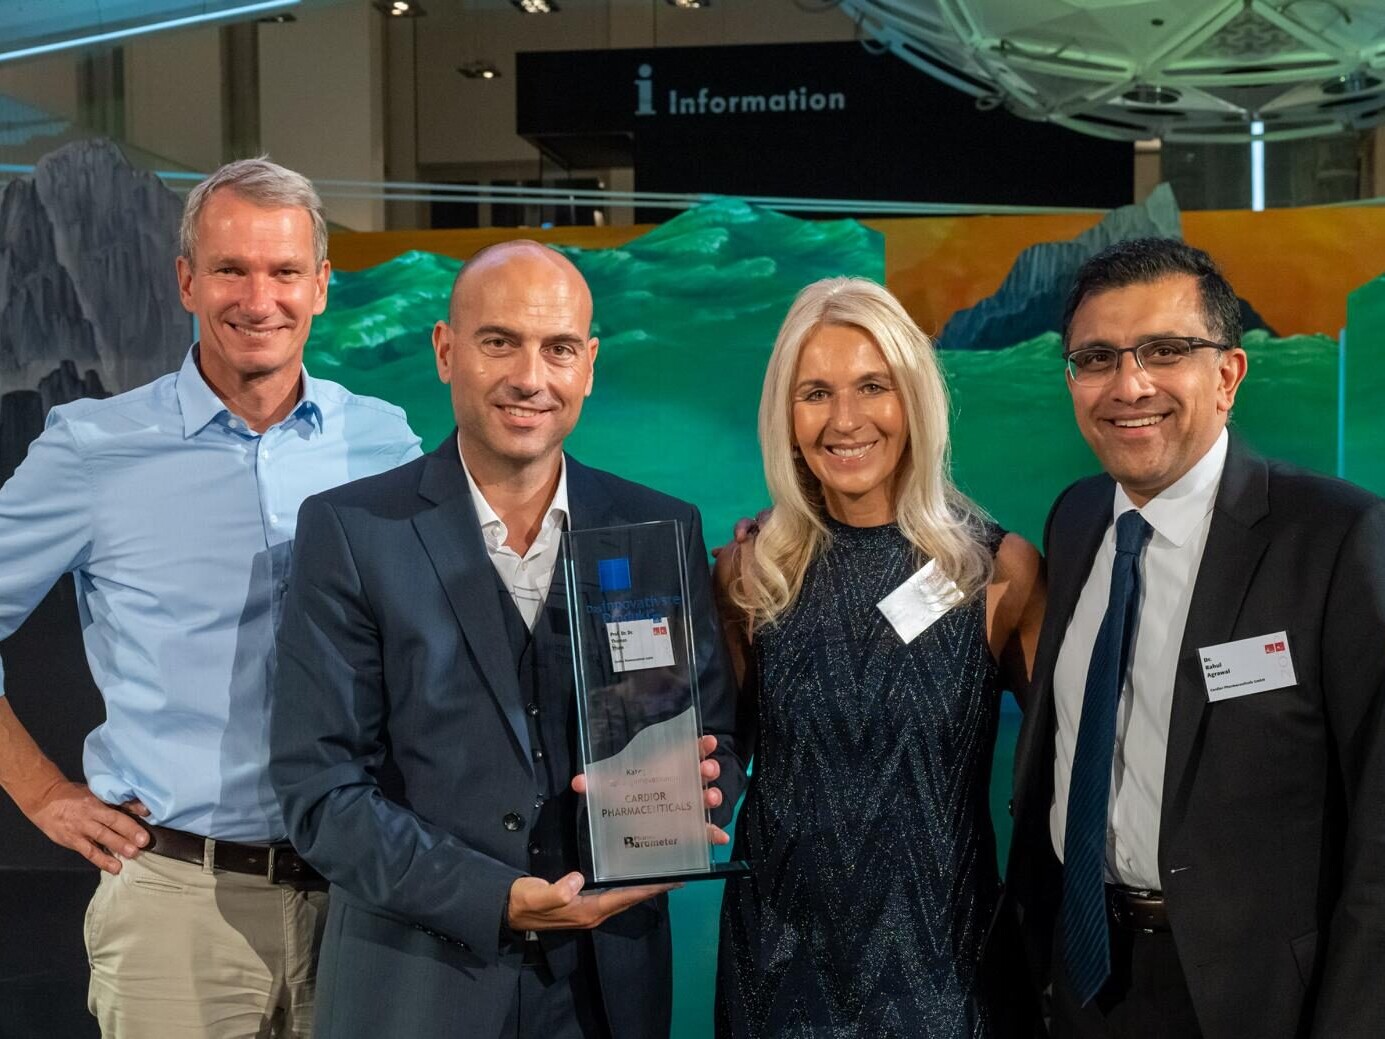 Freuen sich über den Award: (von links) Dr. Peter Ruile, Vice President Business Development & Licensing; Prof. Dr. Dr. Thomas Thum, CSO; Dr. Claudia Ulbrich, CEO; Dr. Rahul Agrawal, CMO